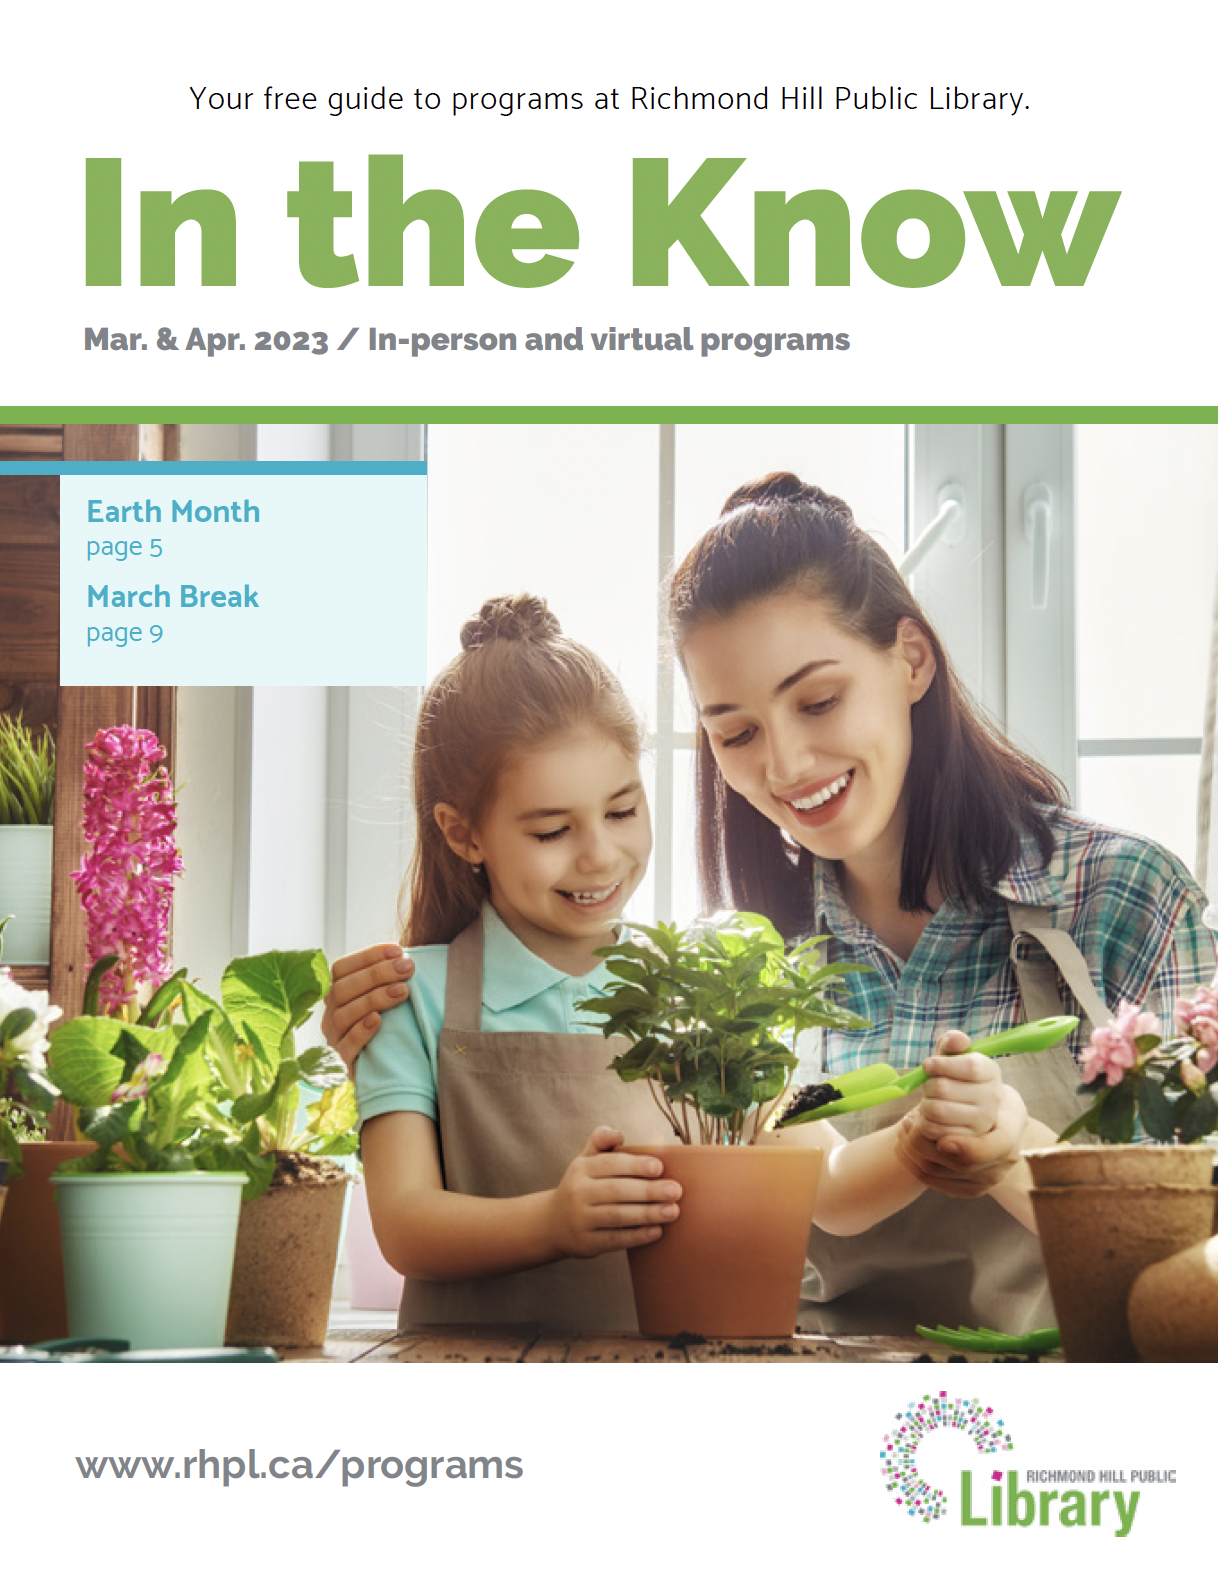 Cover of the program guide. A mother helping her daughter garden.